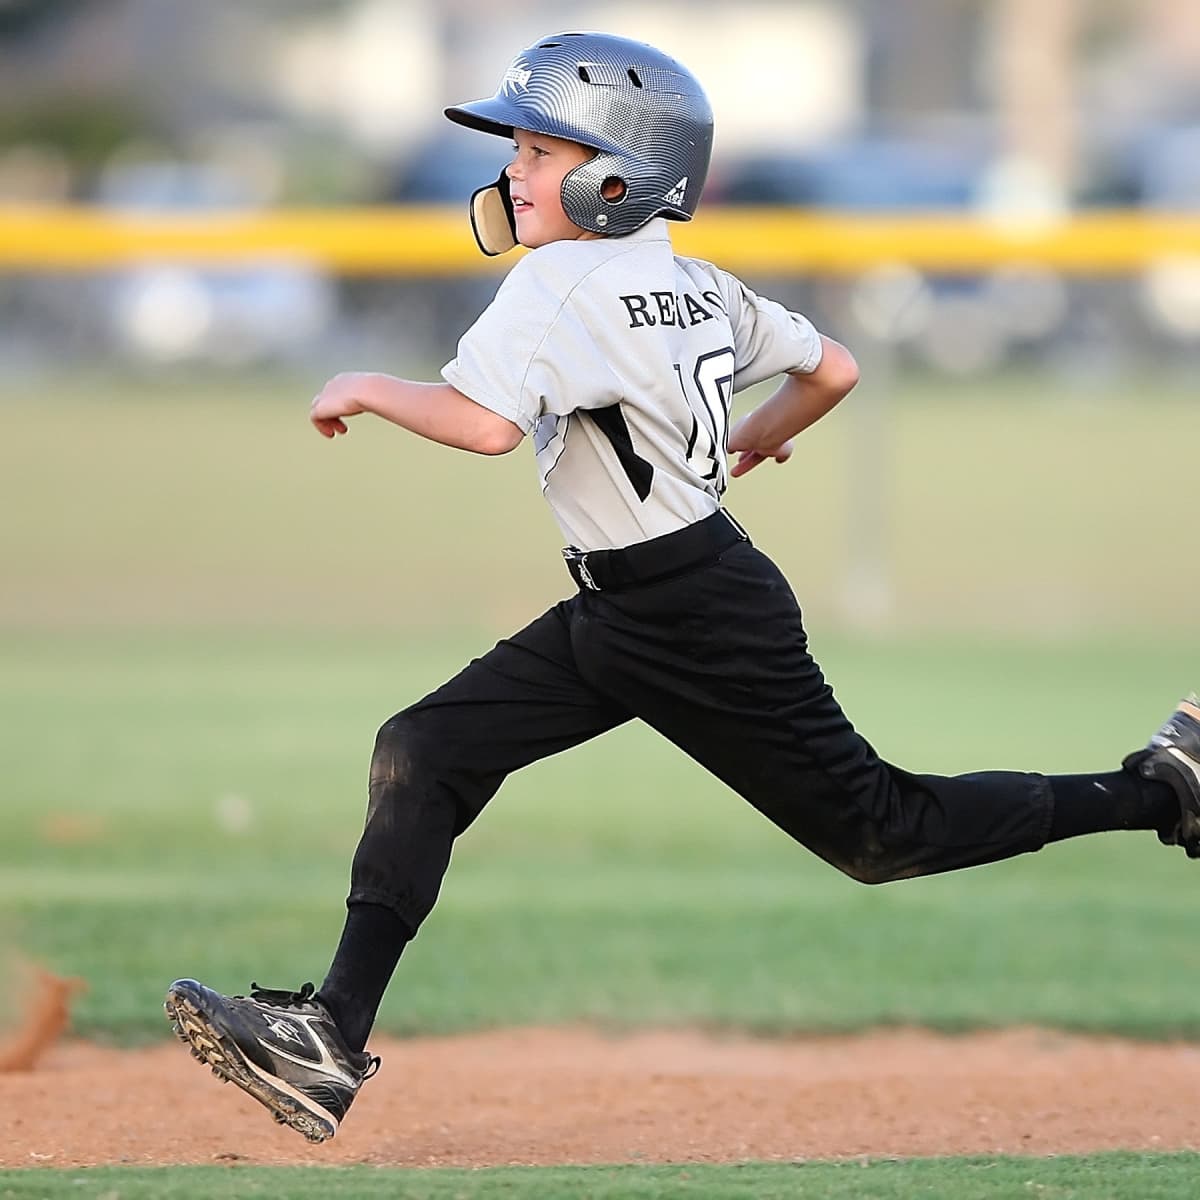 Evaluatie Kloppen Citaat What to Wear for Playing Baseball - HowTheyPlay